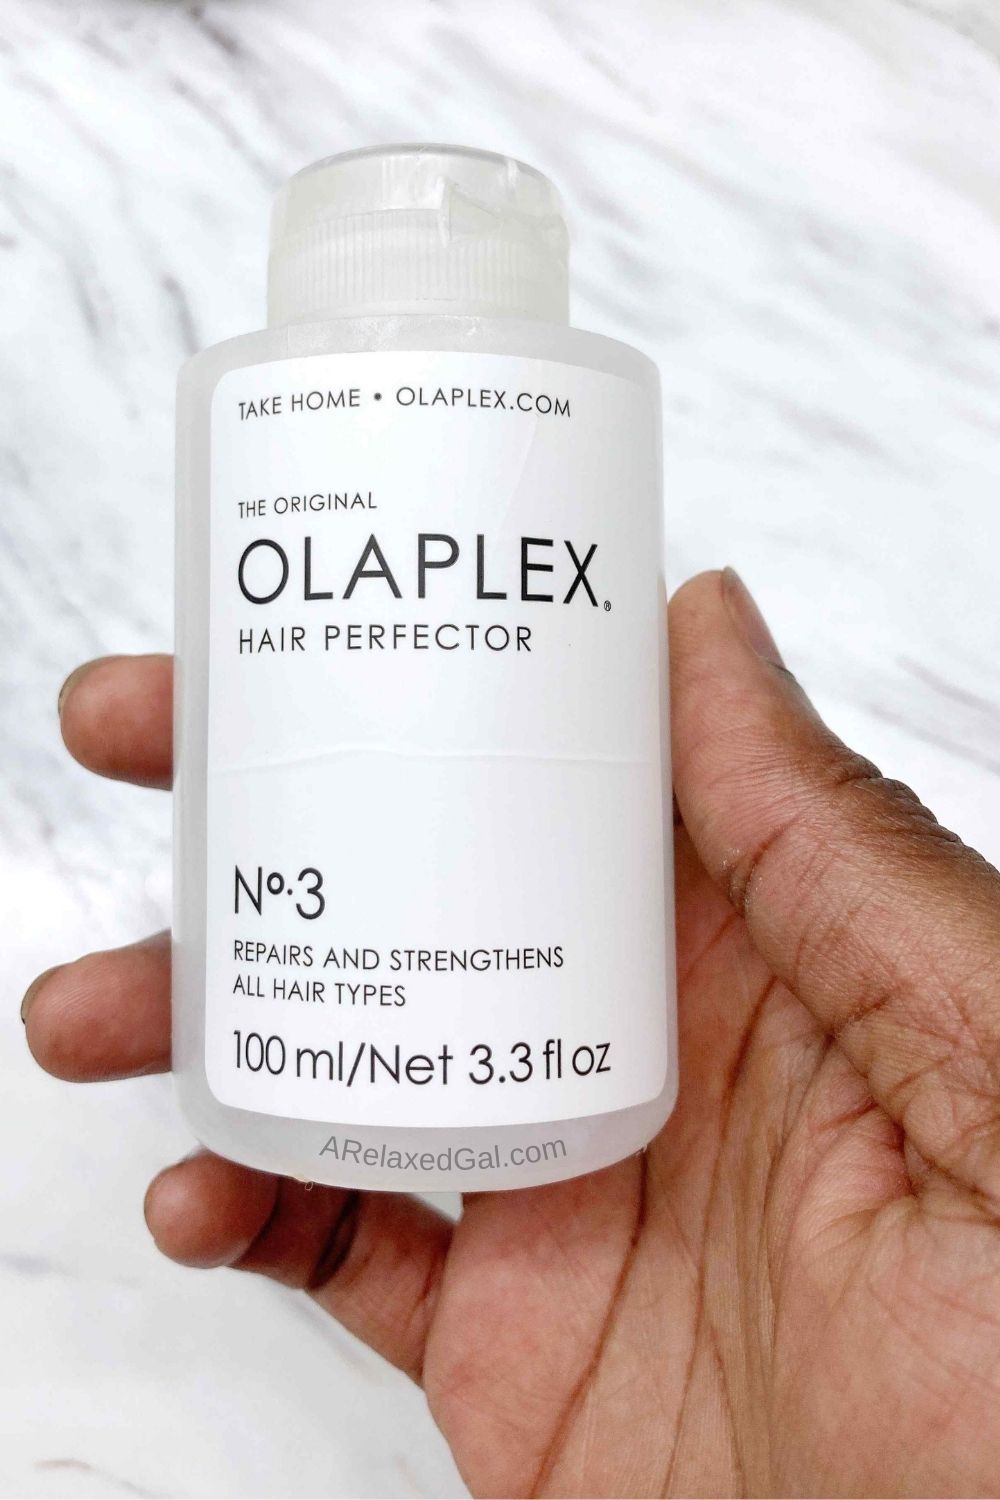 Trying The Olaplex Hair Perfector #3 On My Relaxed Hair | A Relaxed Gal